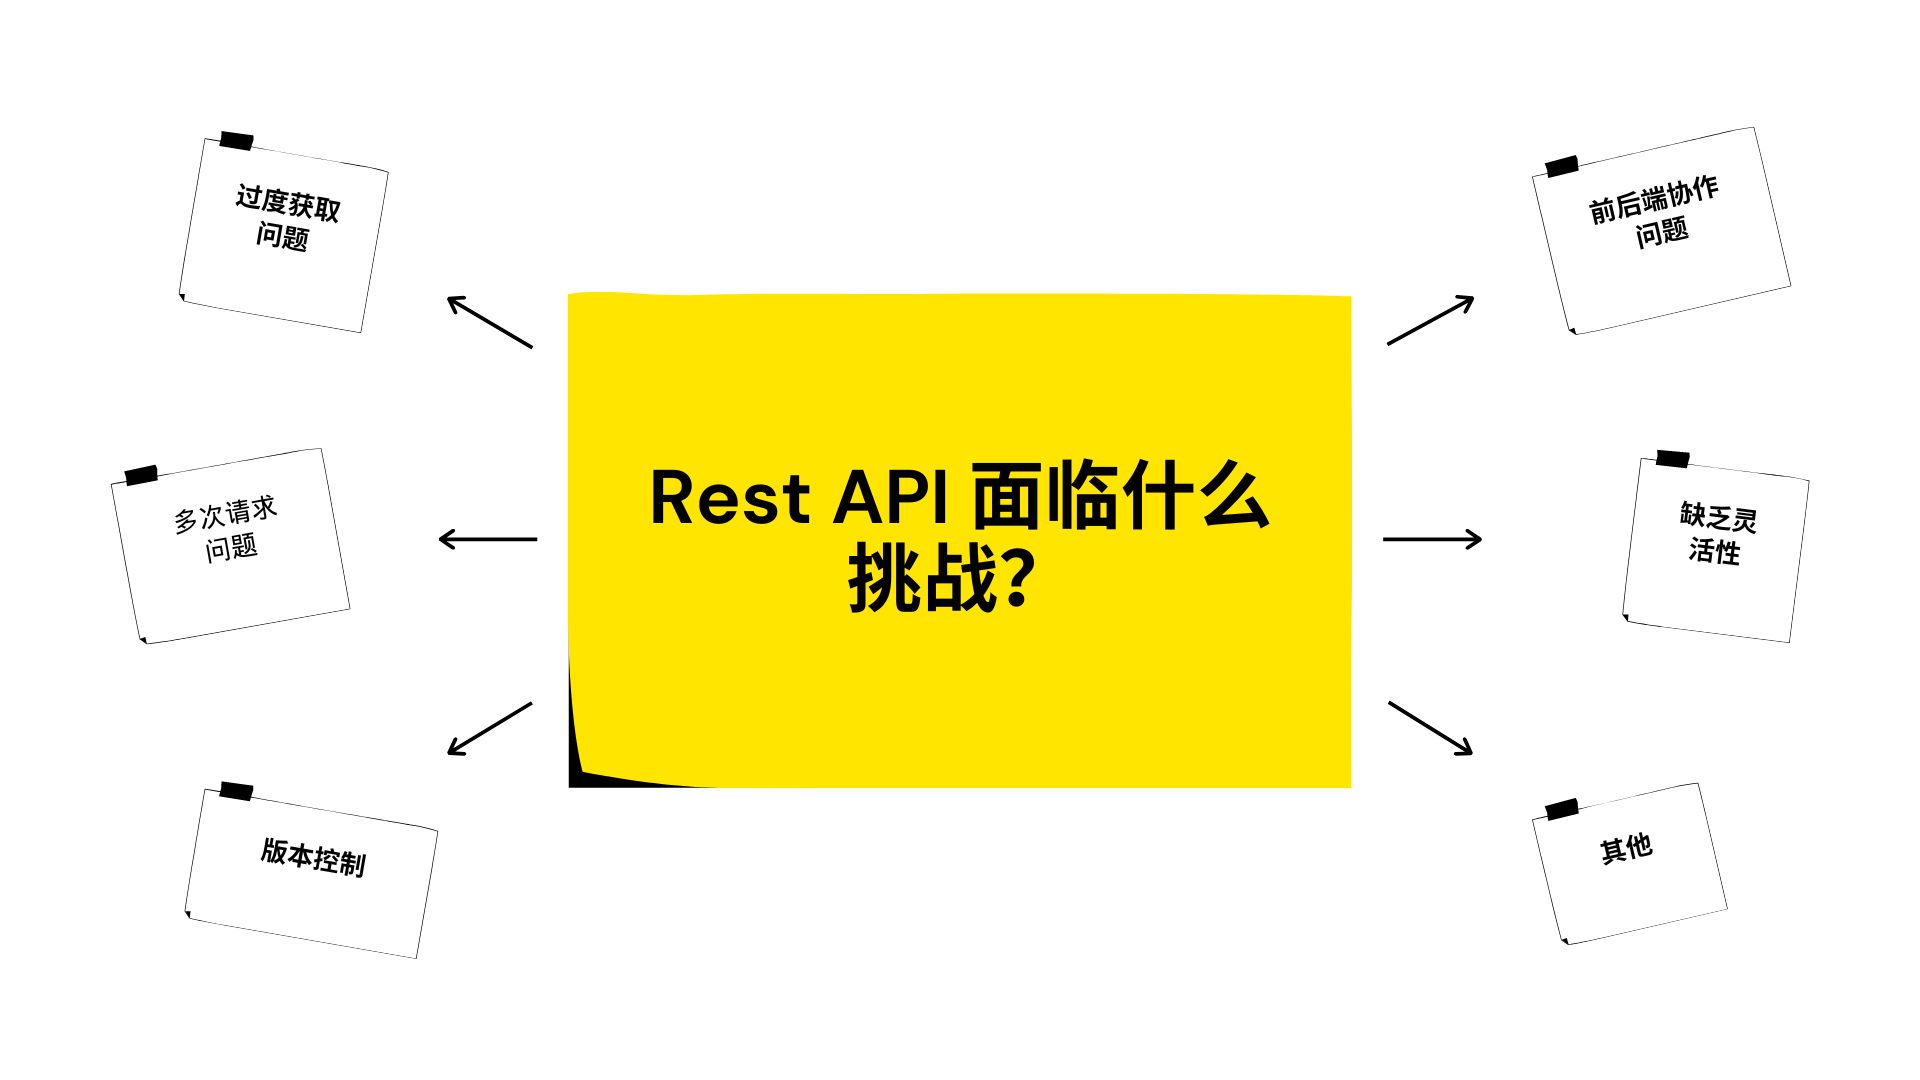 Challenges faced by Rest API